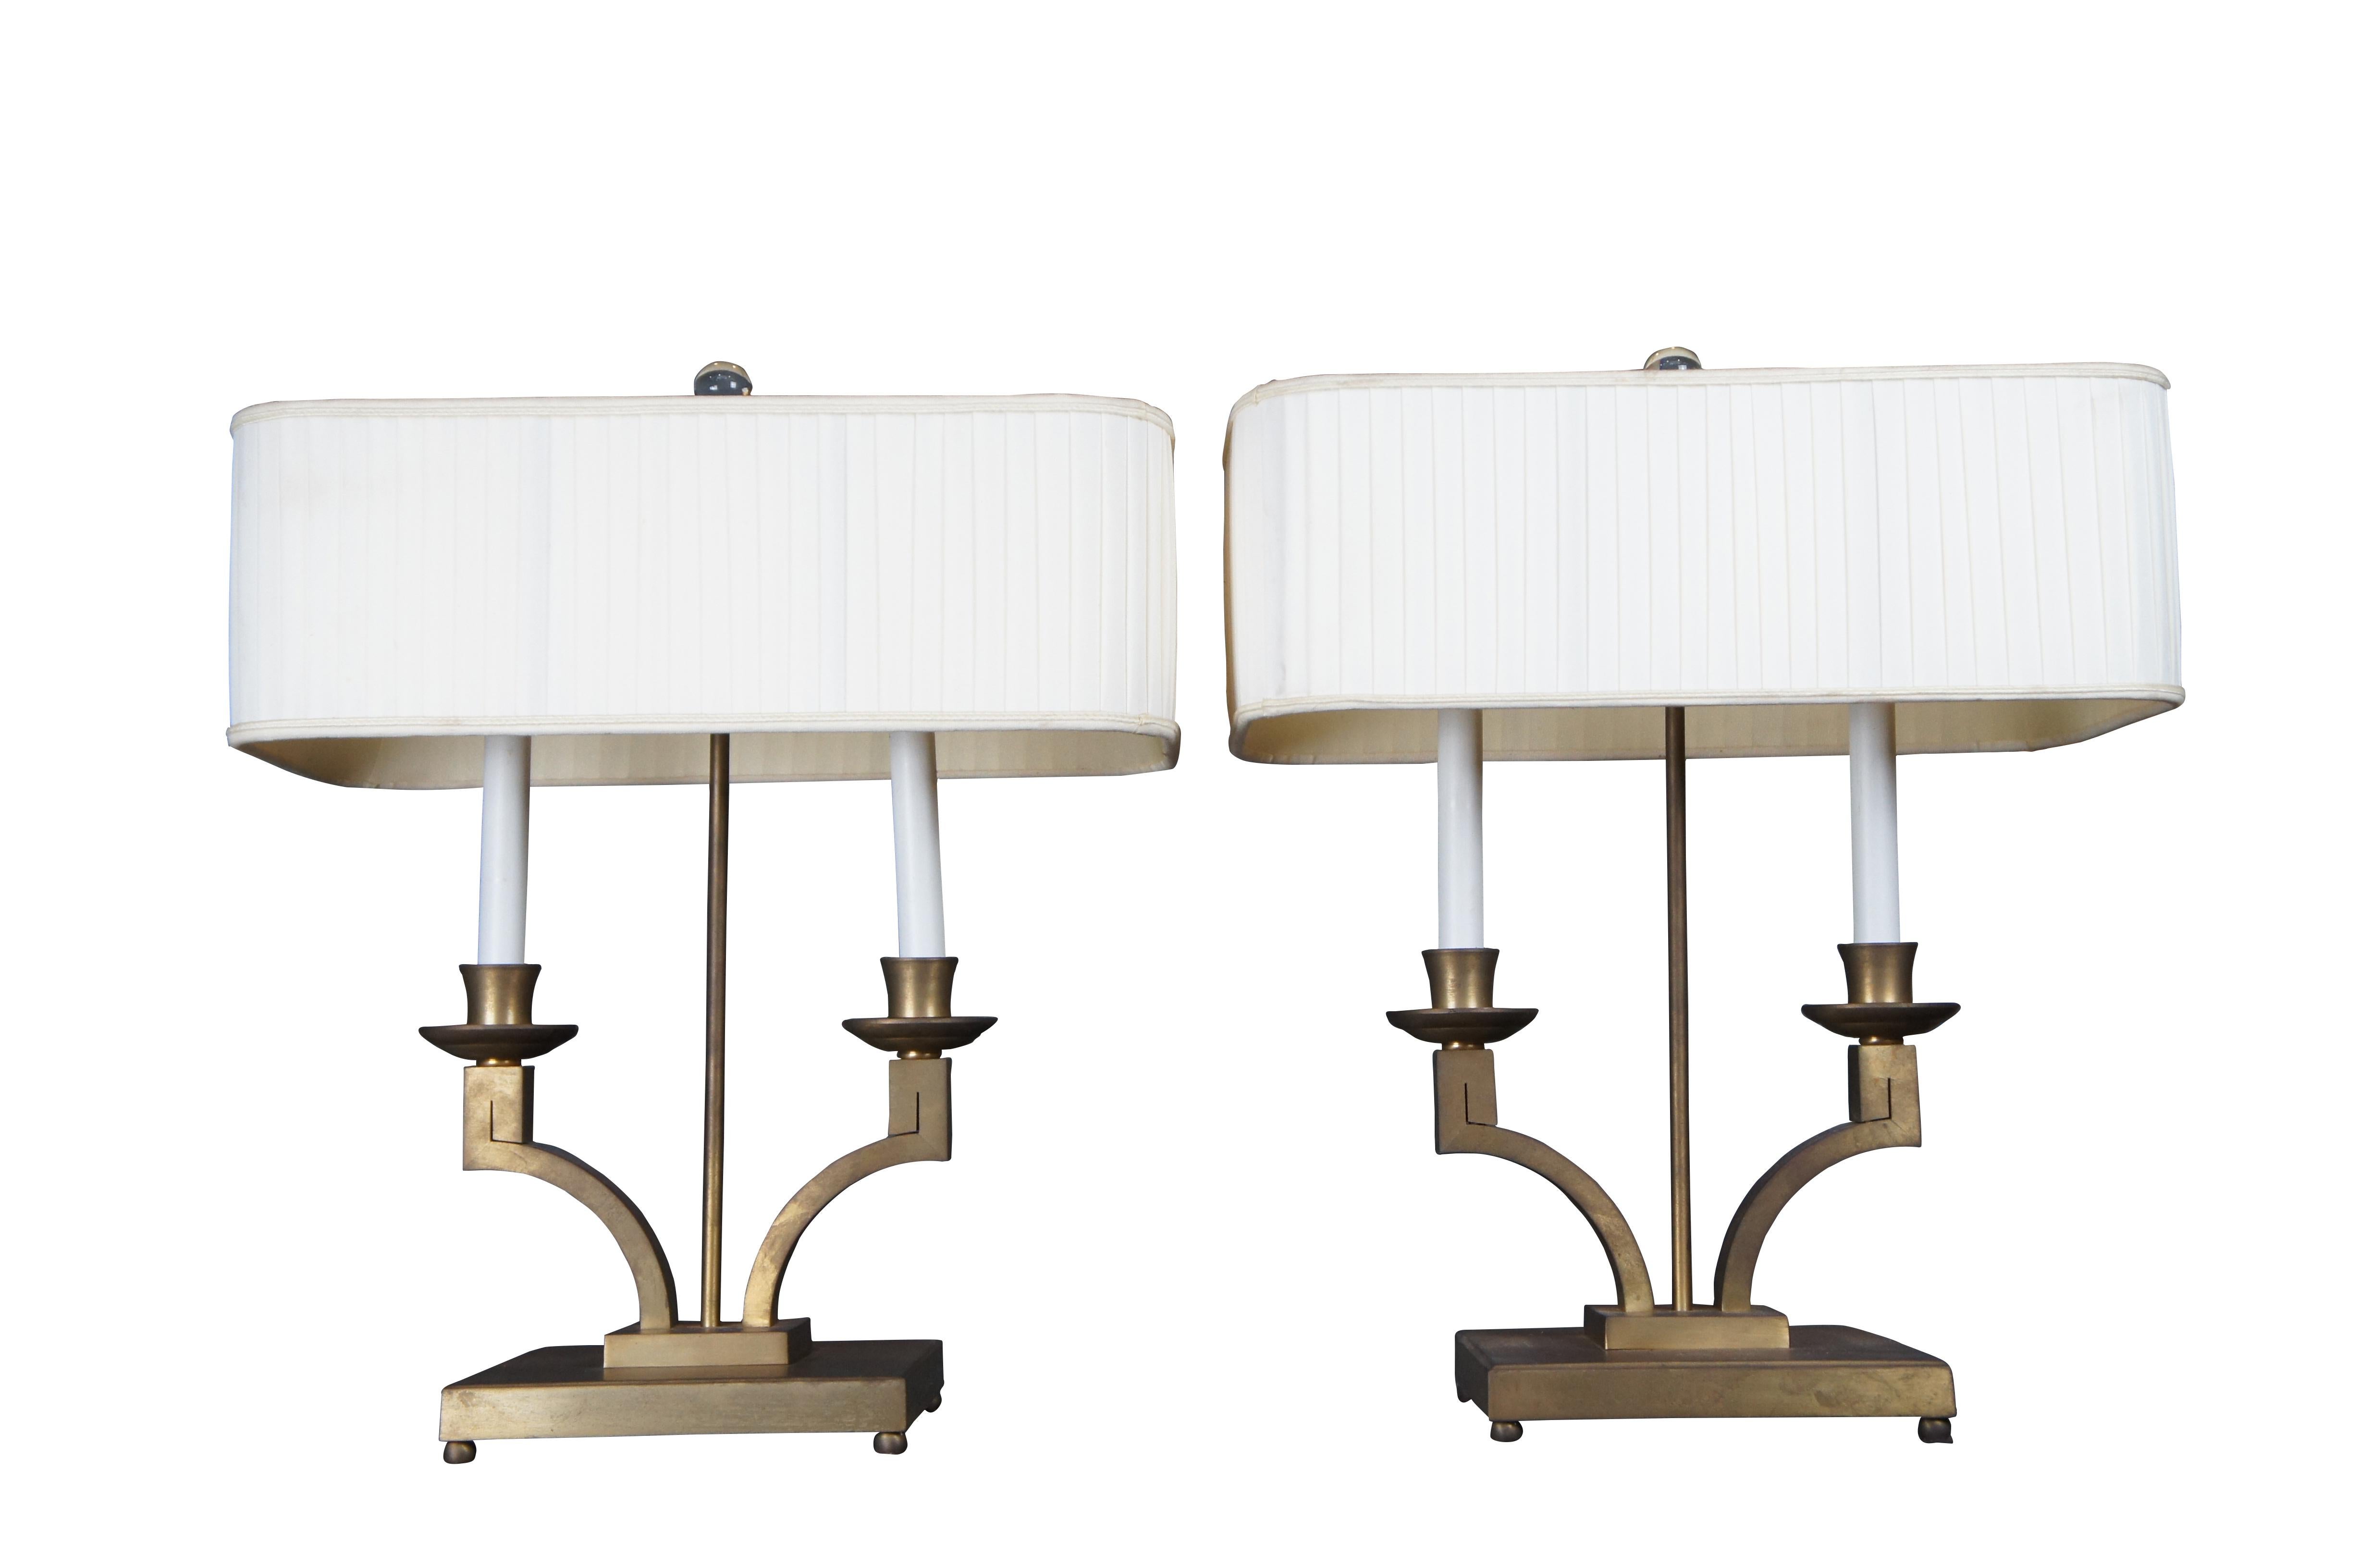 Pair of Modern Laurent Bouillotte double bulb table lamps by Baker Furniture. Part of the Jacques Garcia Collection. Finished in a Champagne colored brass base with curved pleated shade, Murano glass ball finial and round brass